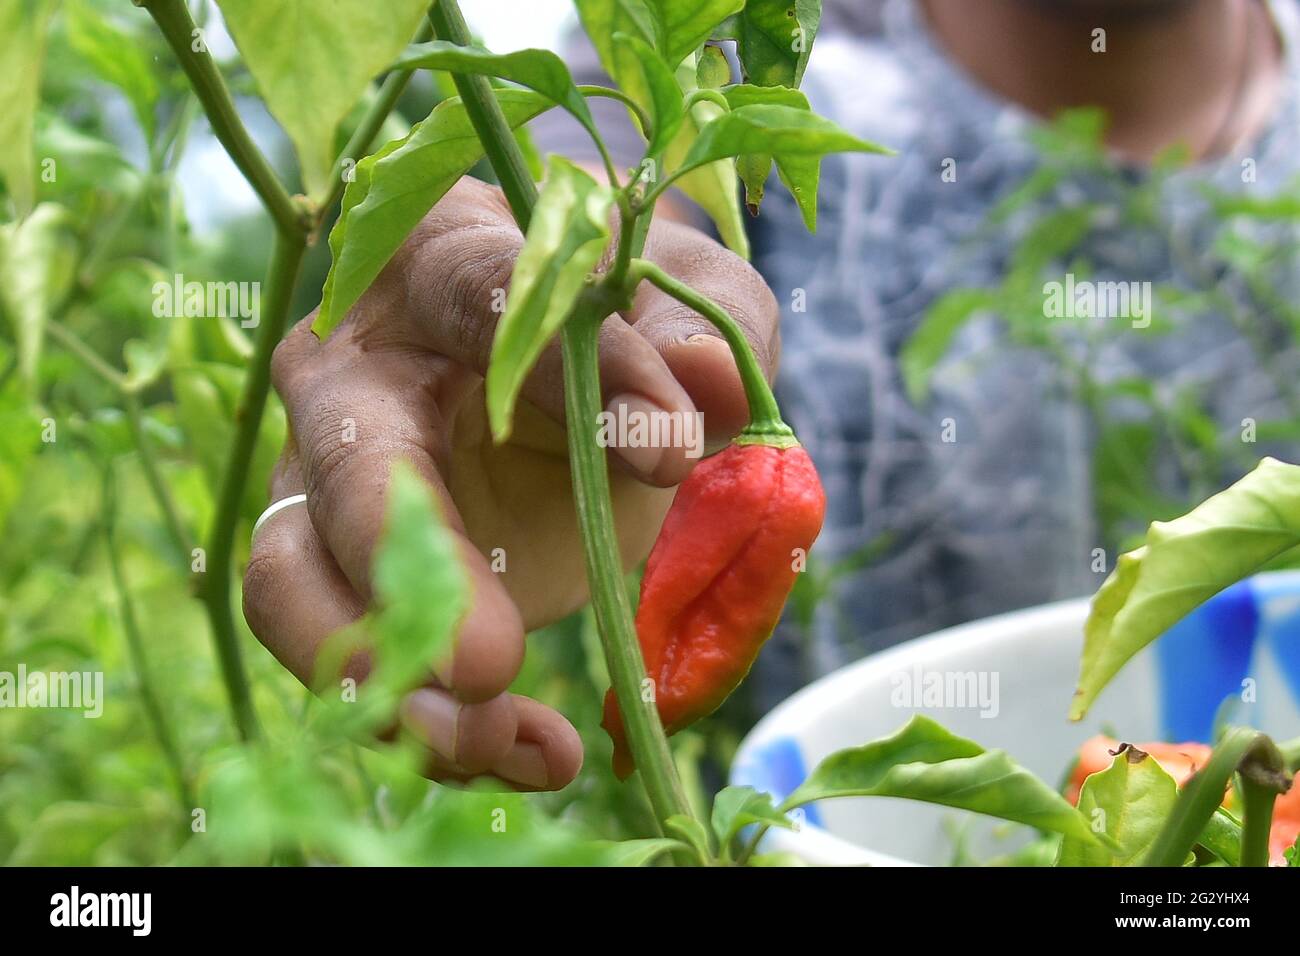 (210613) -- NAGAON, June 13, 2021 (Xinhua) -- A farmer plucks 'ghost chilli' or 'bhut jolokia' peppers at a field in Nagaon district, India's northeastern state of Assam, June 13, 2021. (Str/Xinhua) Stock Photo